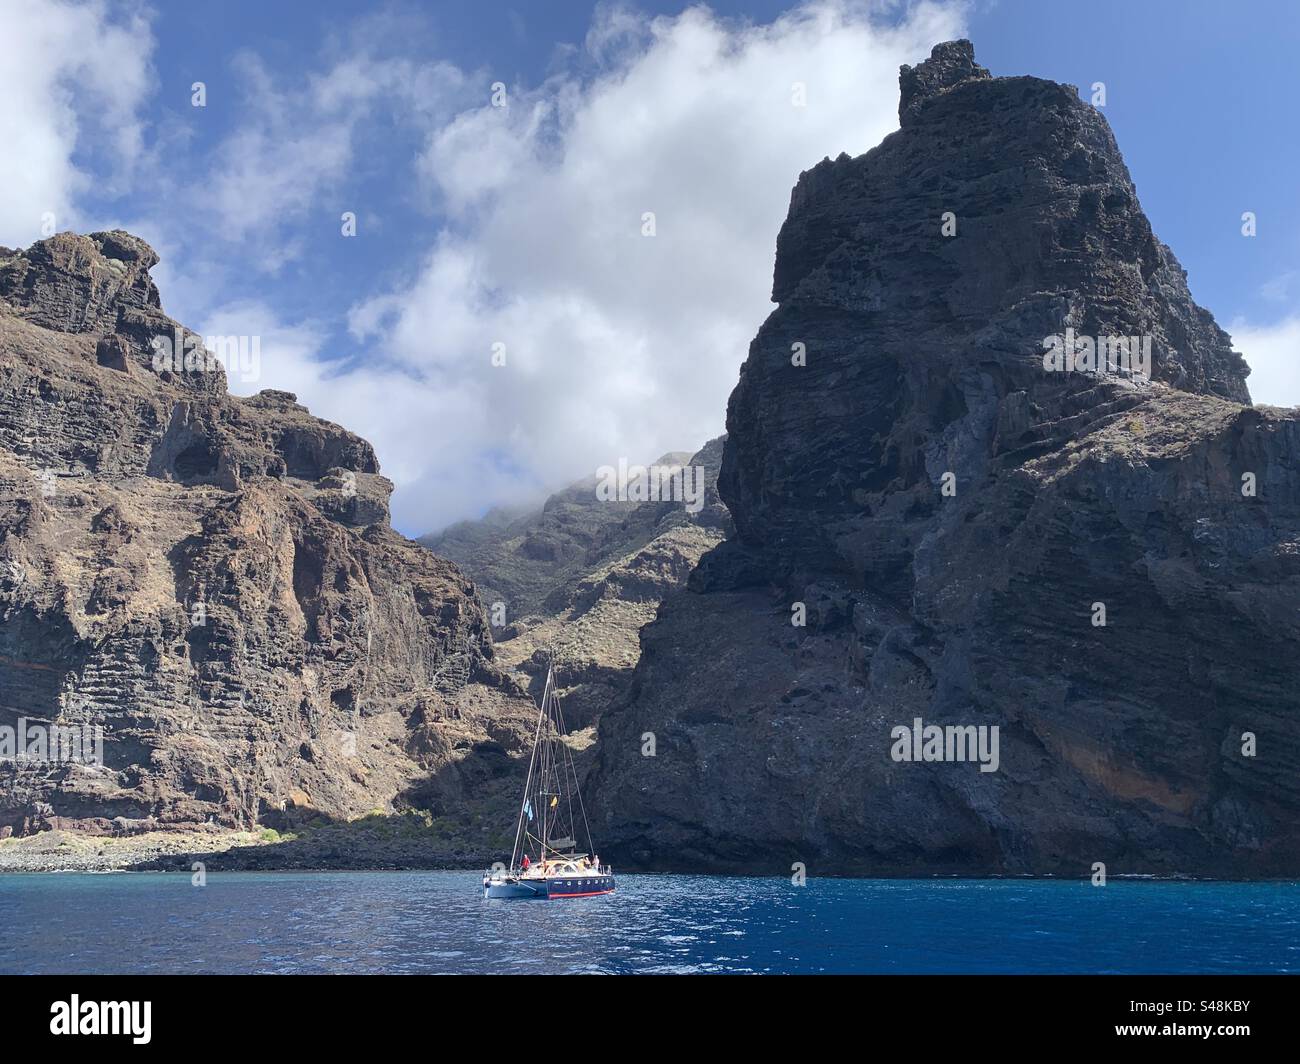 Los Gigantes cliffs Tenerife and small boat Stock Photo